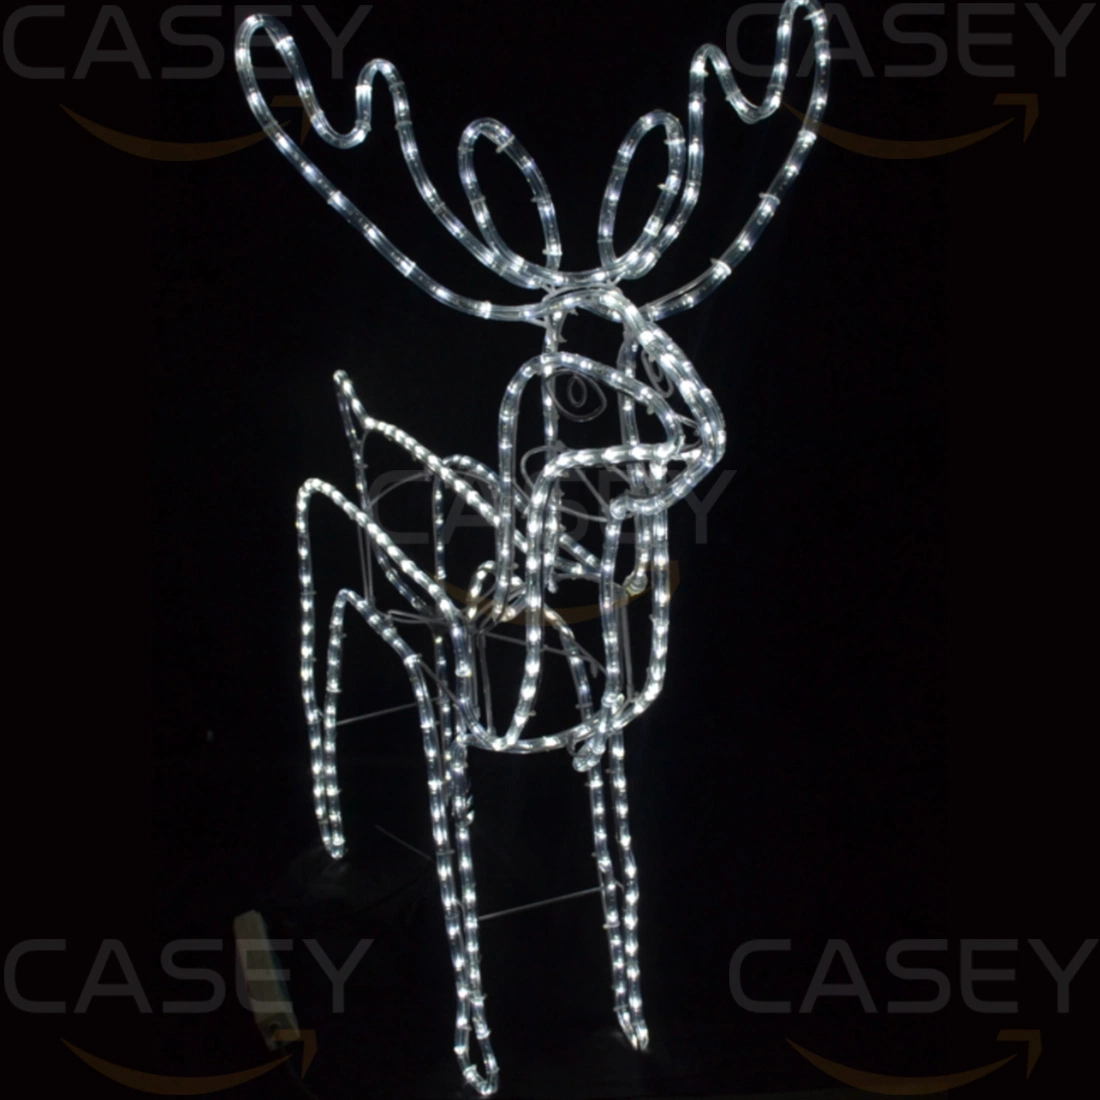 Large Lighte Deer Family Set Outdoor Christmas Decoration with LED Lights Gold Twinkling Holiday Ornaments Yard Decor for Home Lawn and Front Yard